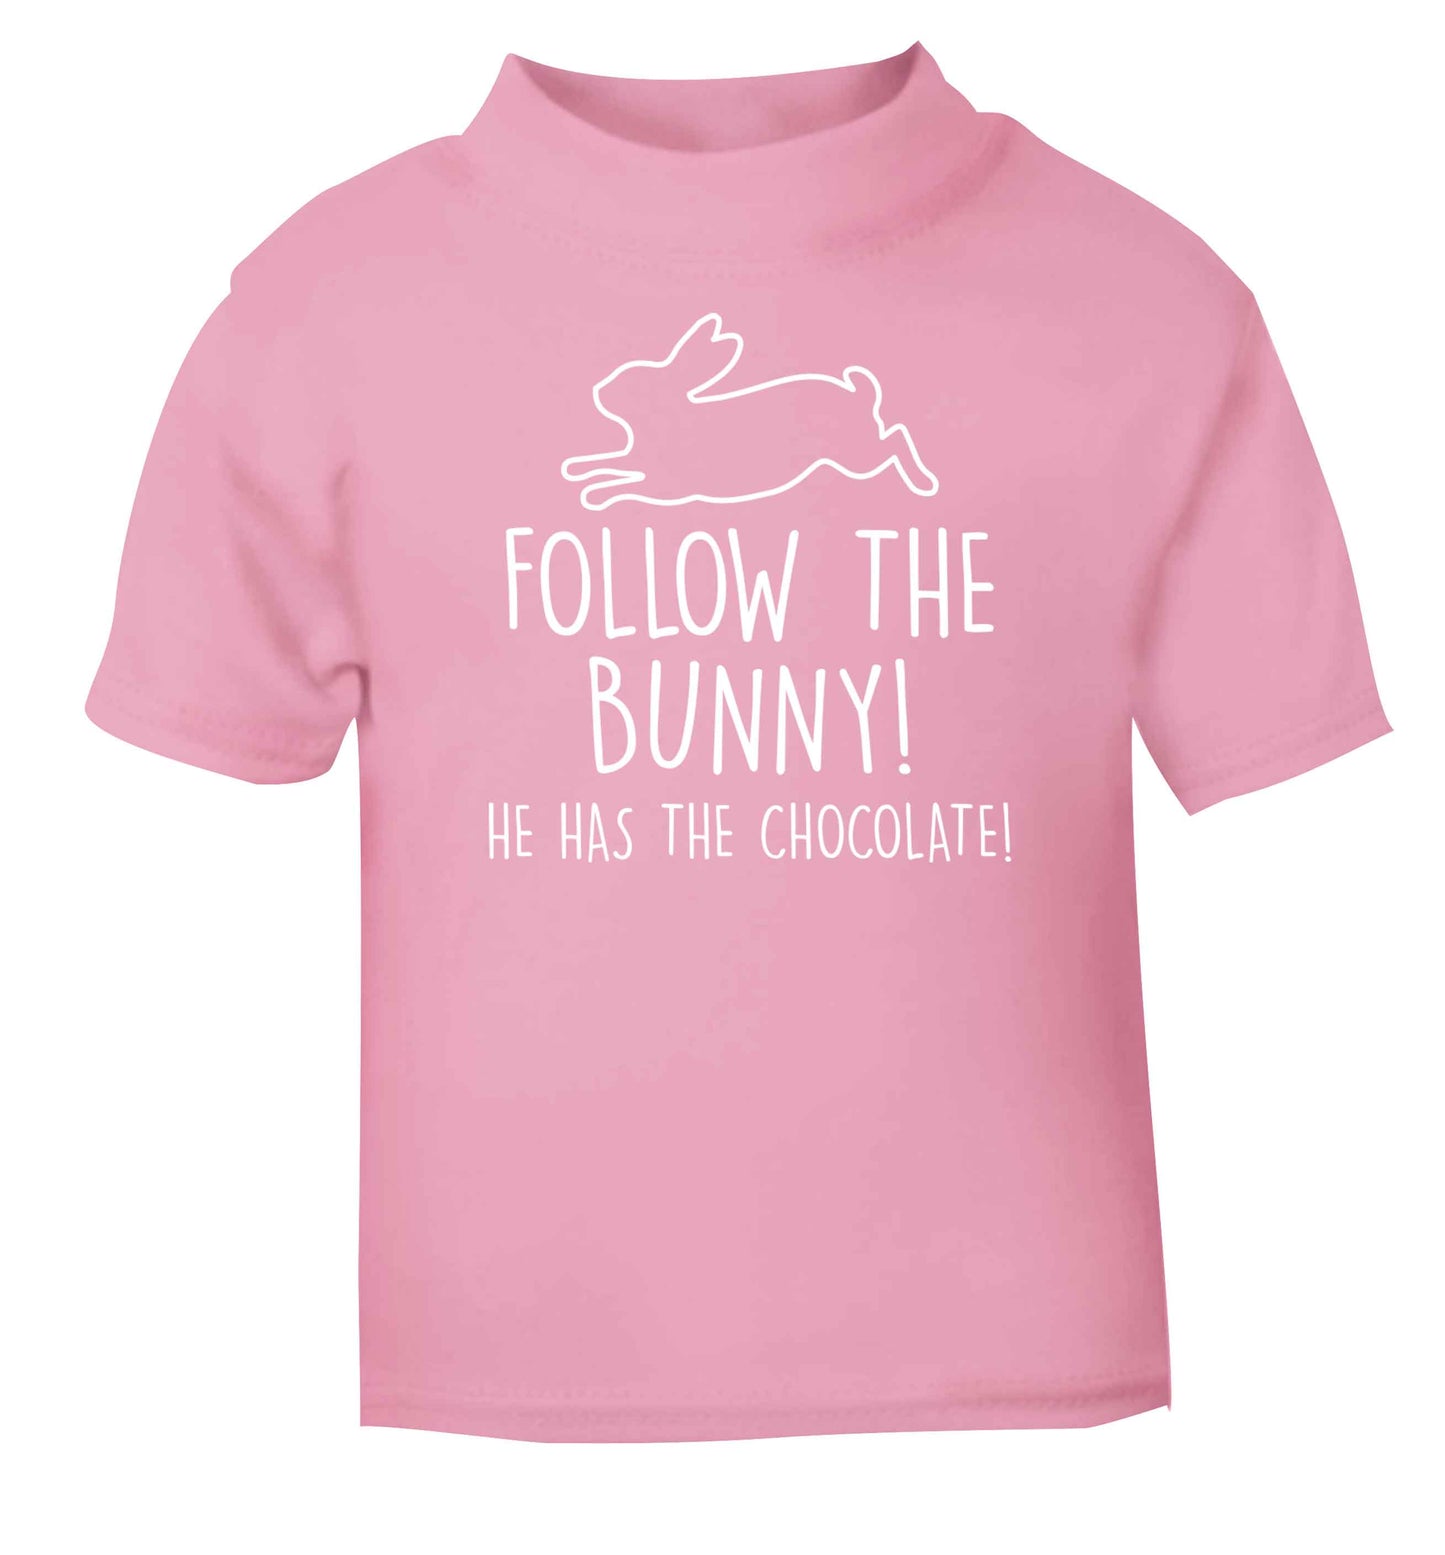 Follow the bunny! He has the chocolate light pink baby toddler Tshirt 2 Years